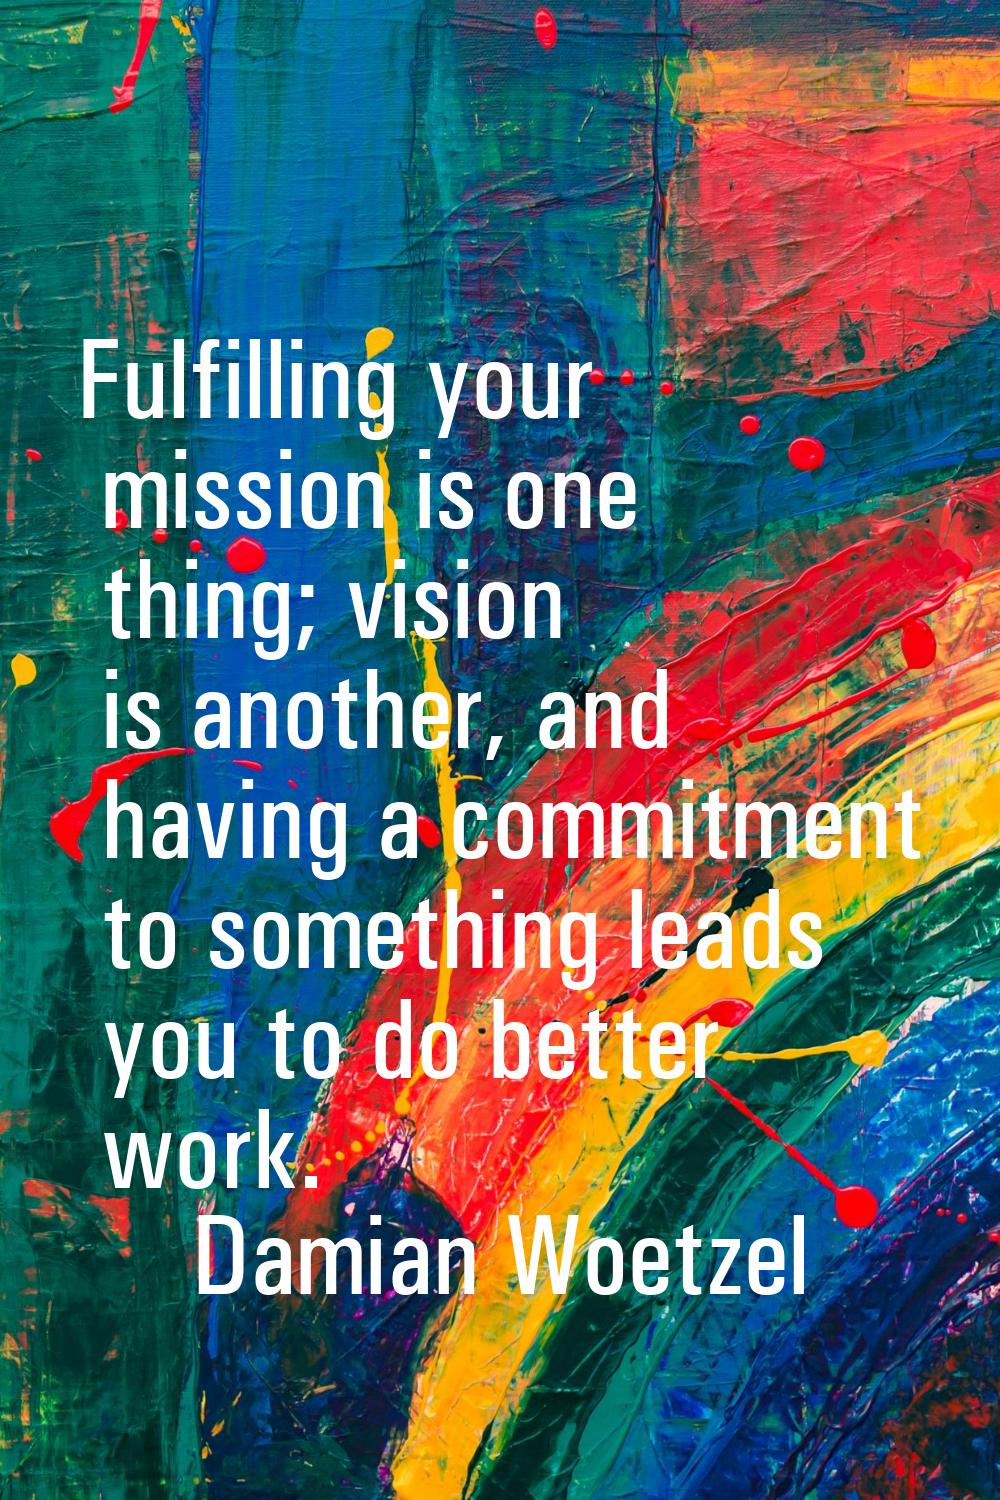 Fulfilling your mission is one thing; vision is another, and having a commitment to something leads